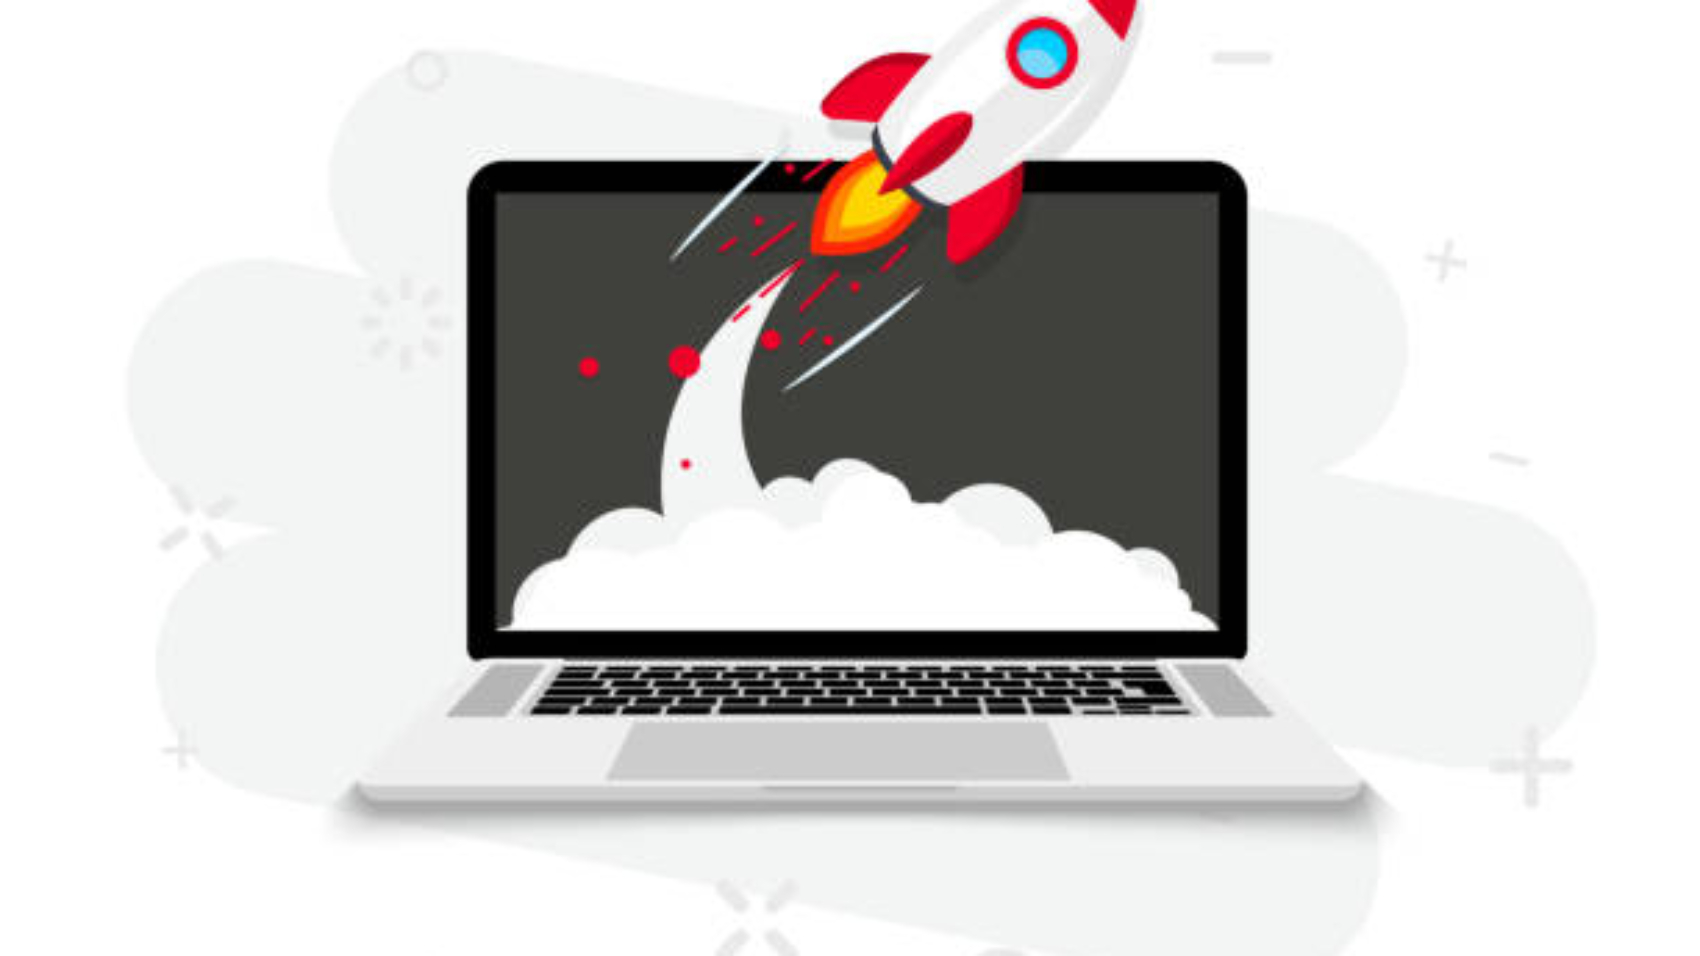 Rocket launch from laptop screen. Rocket taking off. Business Start up, Launching new product or service. Successful start-up launch new business project. Creative or innovative idea. Rocket launch